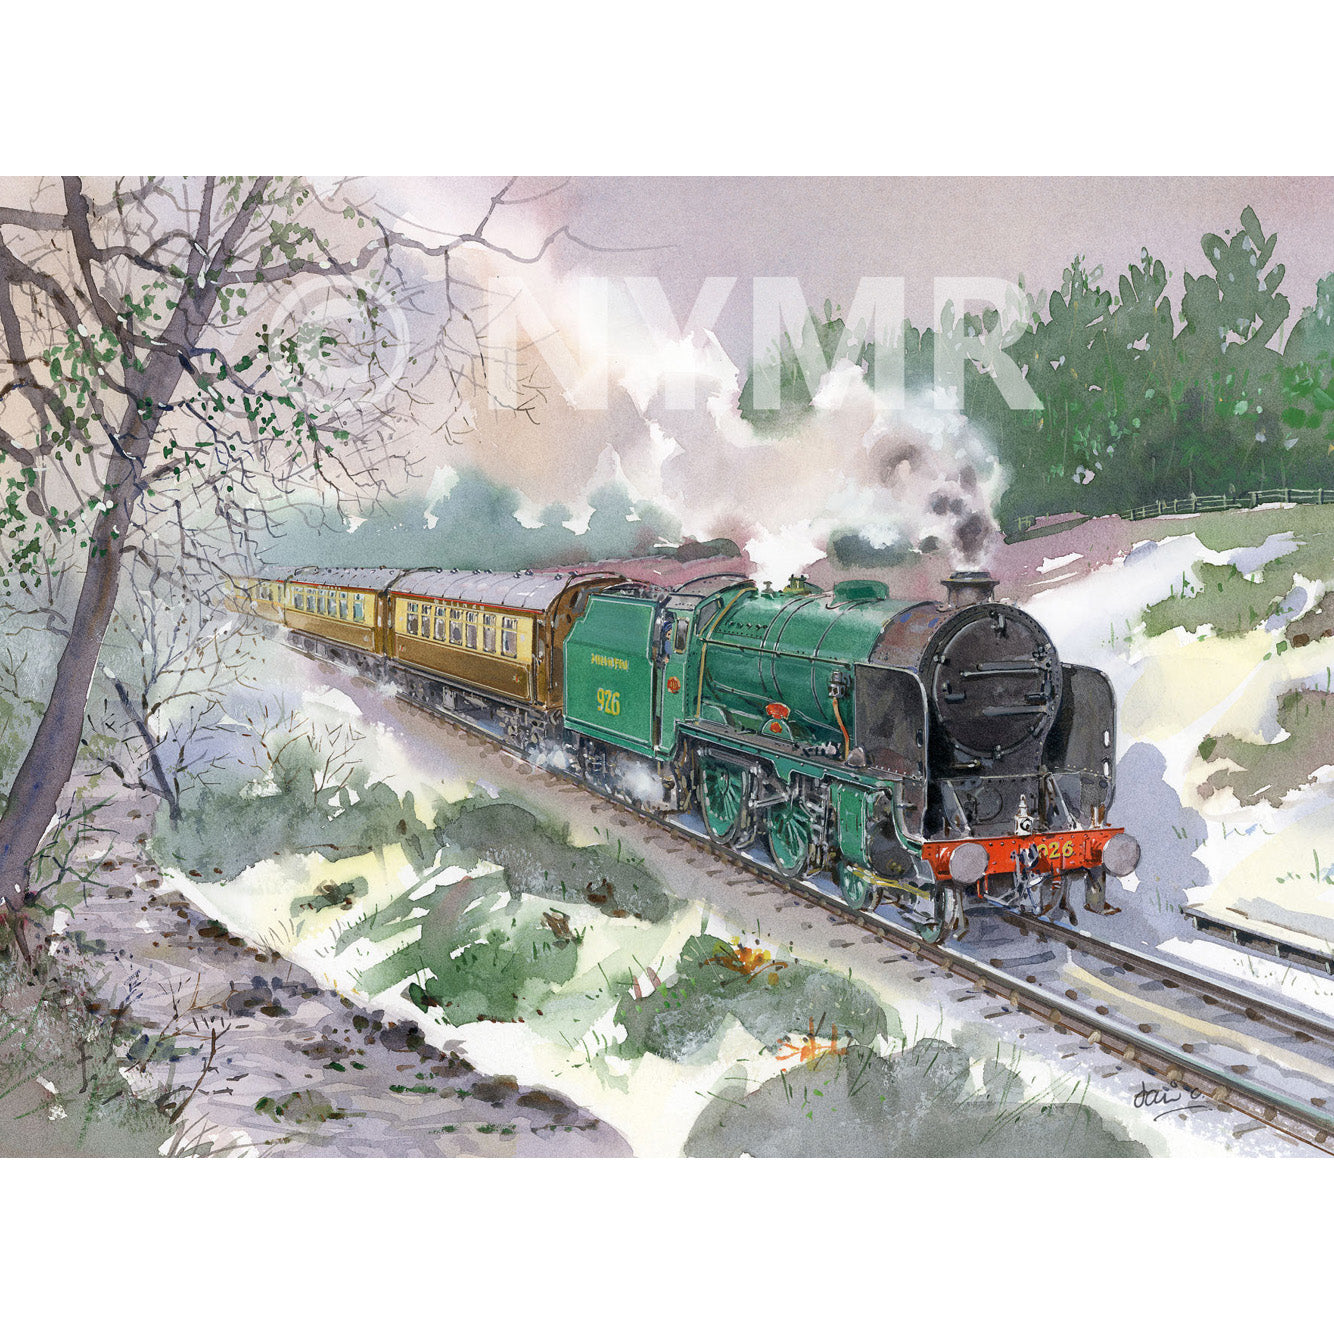 A Christmas card with a painting of SR Number 926 Repton pulling the Pullman Diner in the snow.